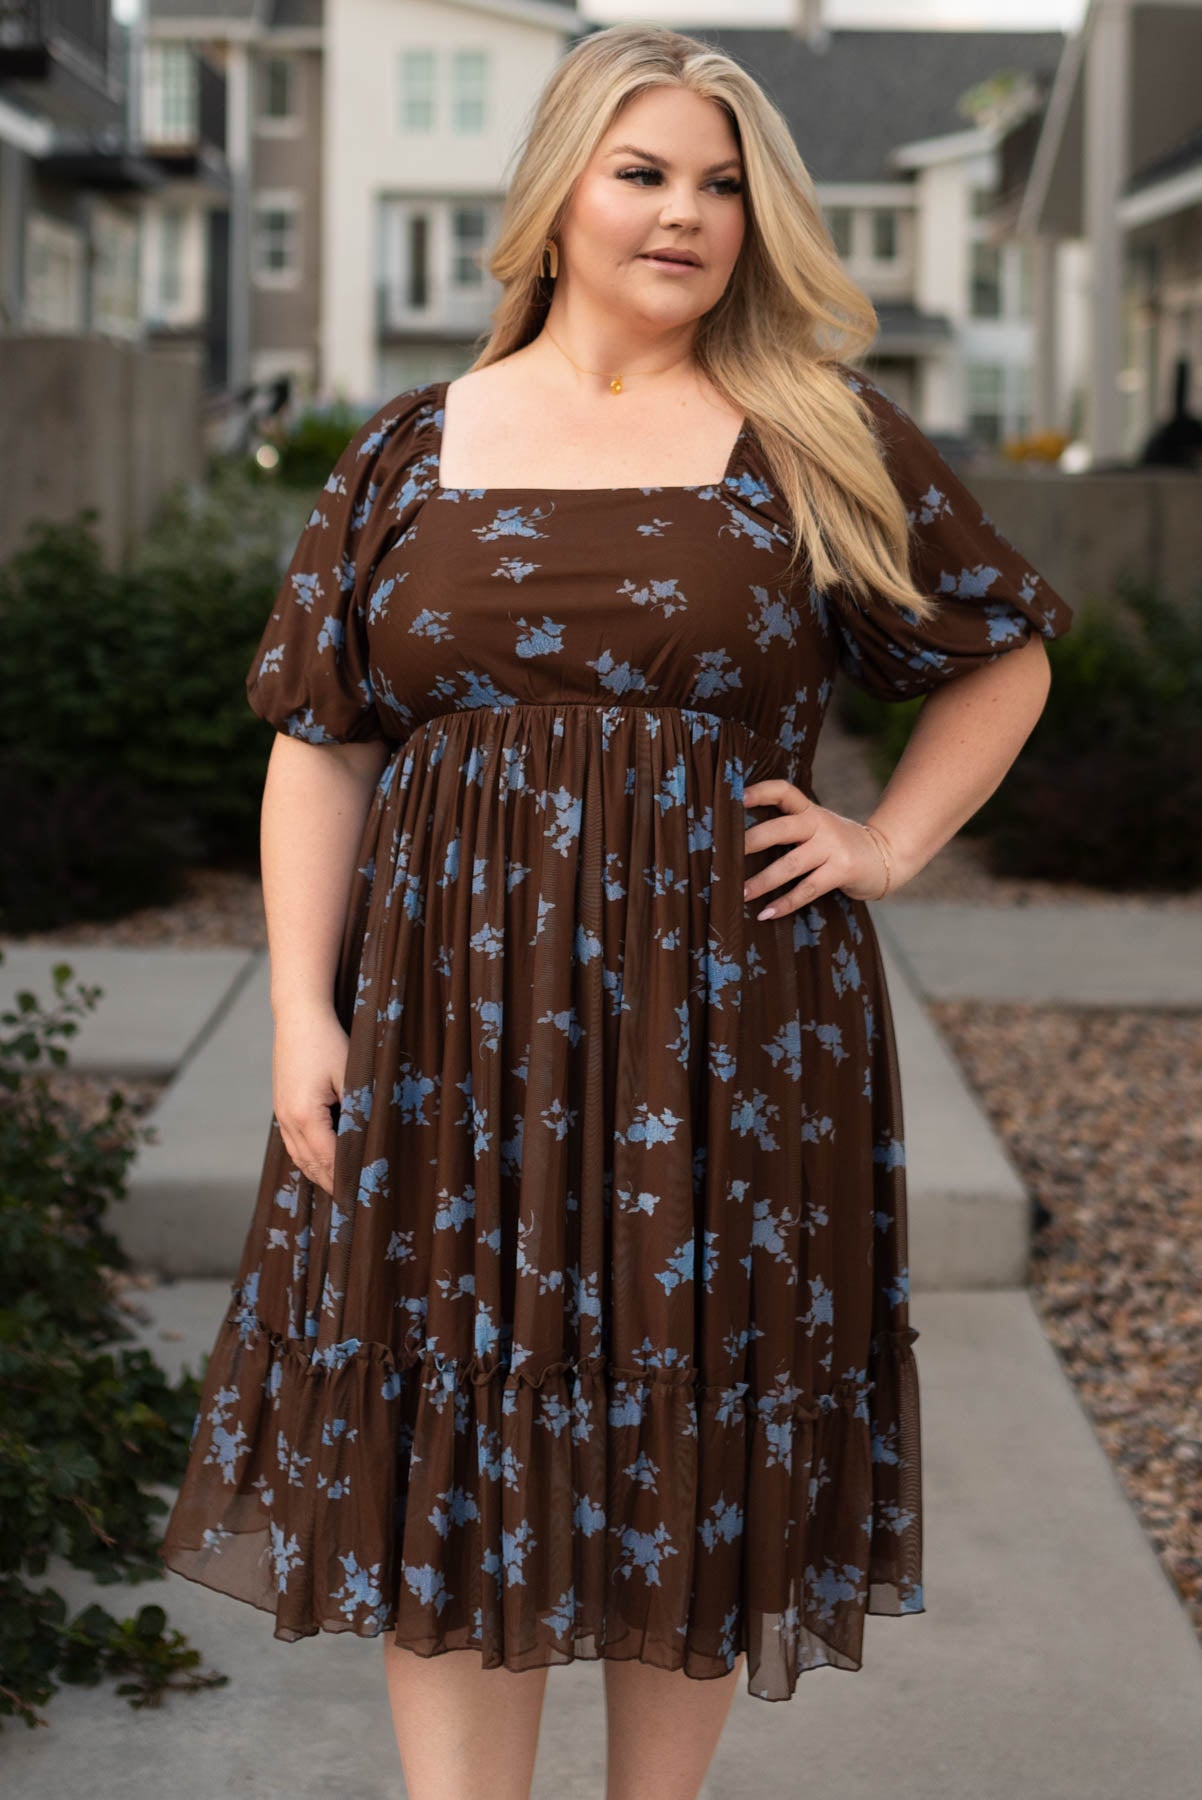 Short sleeve chocolate dress with short sleeves and a square dress